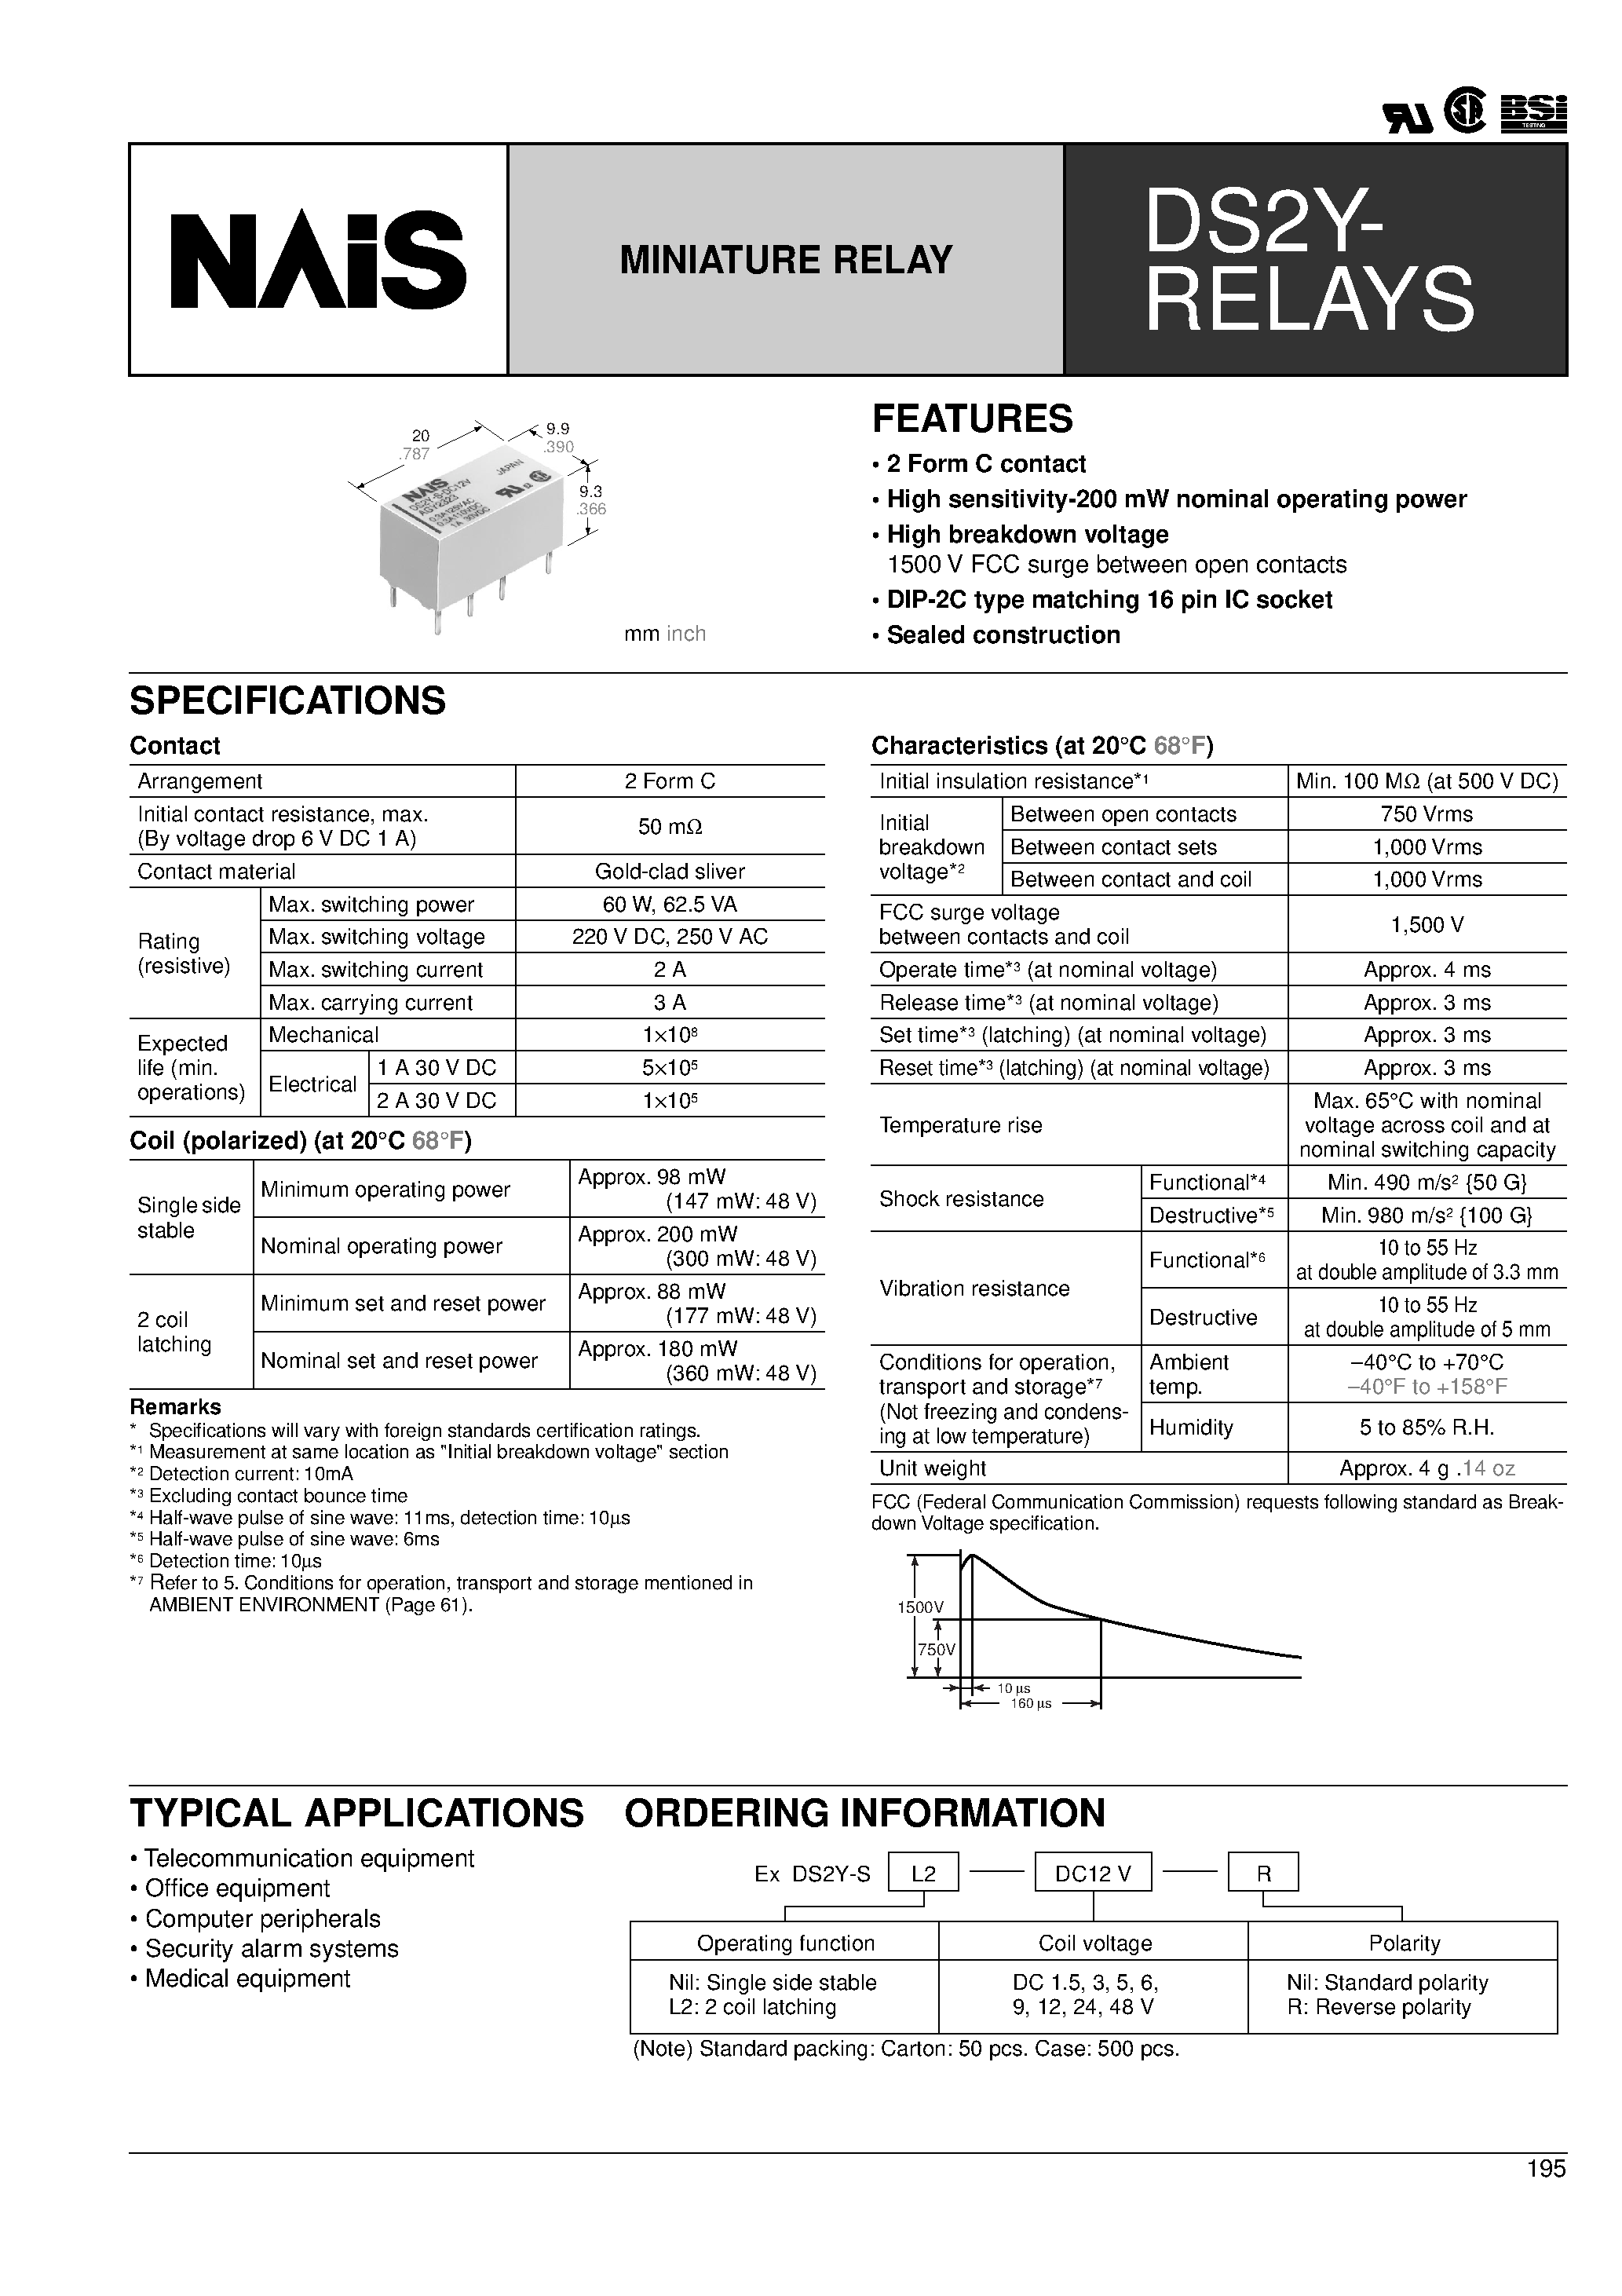 Datasheet DS2Y-SL2-DC3V - 2 Form C contact High sensitivity-200 mW nominal operating power page 1